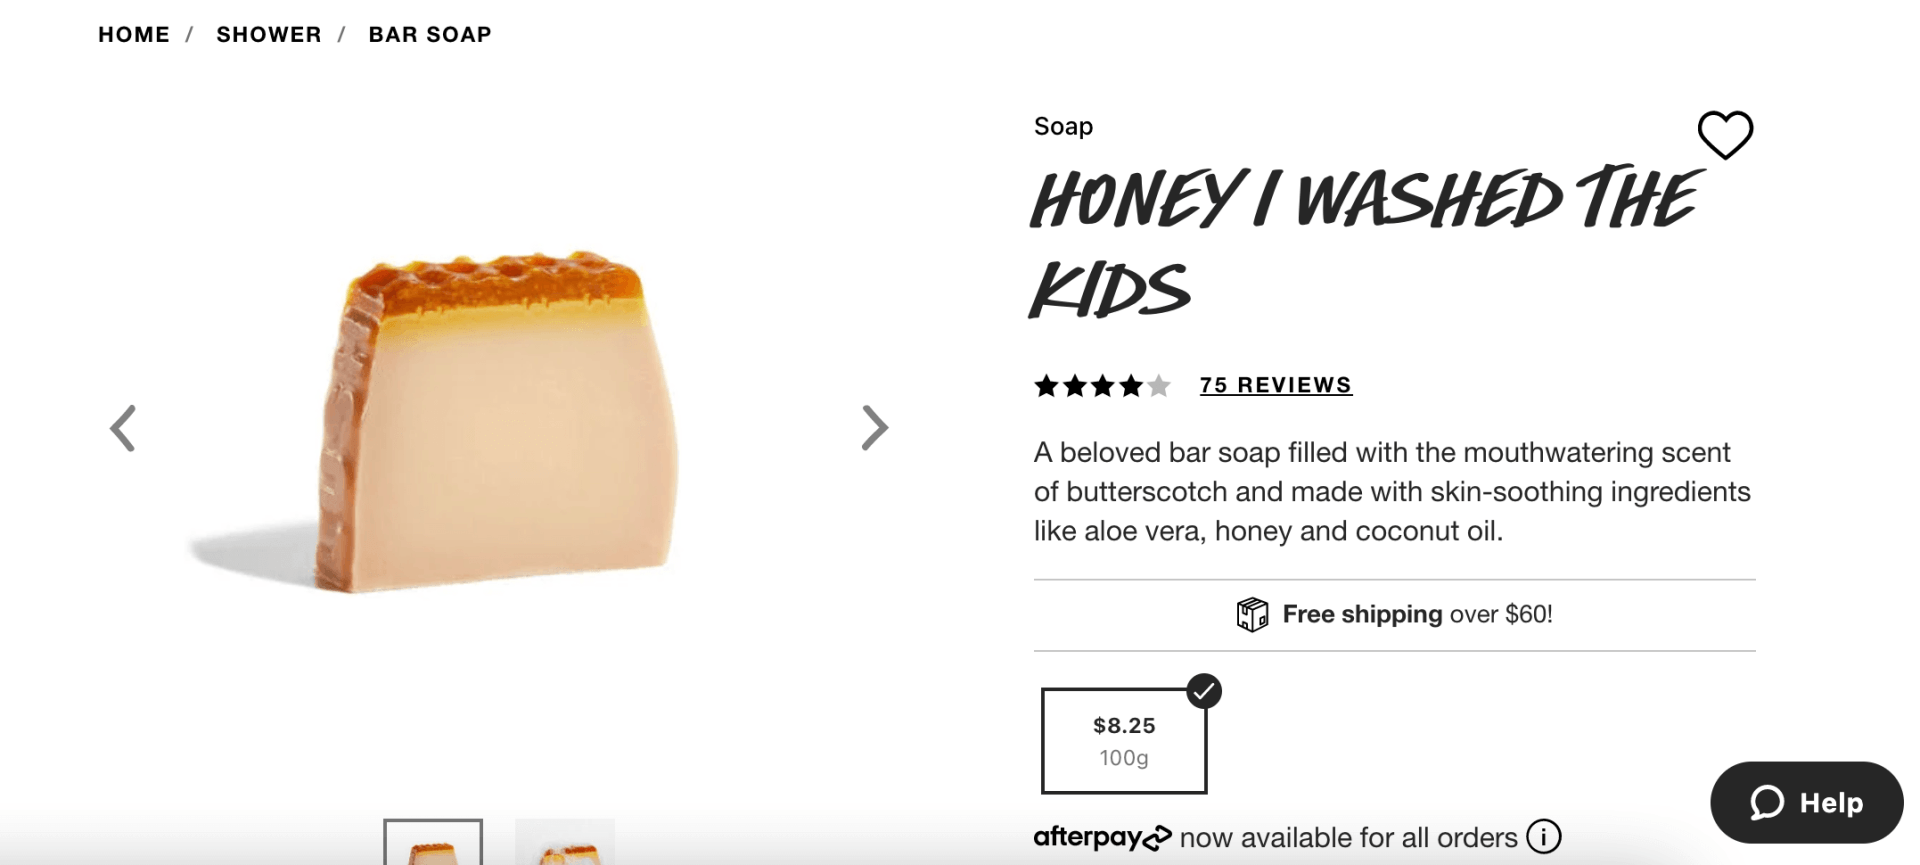 A screenshot of a web page showing a product listing for a bar of soap called 